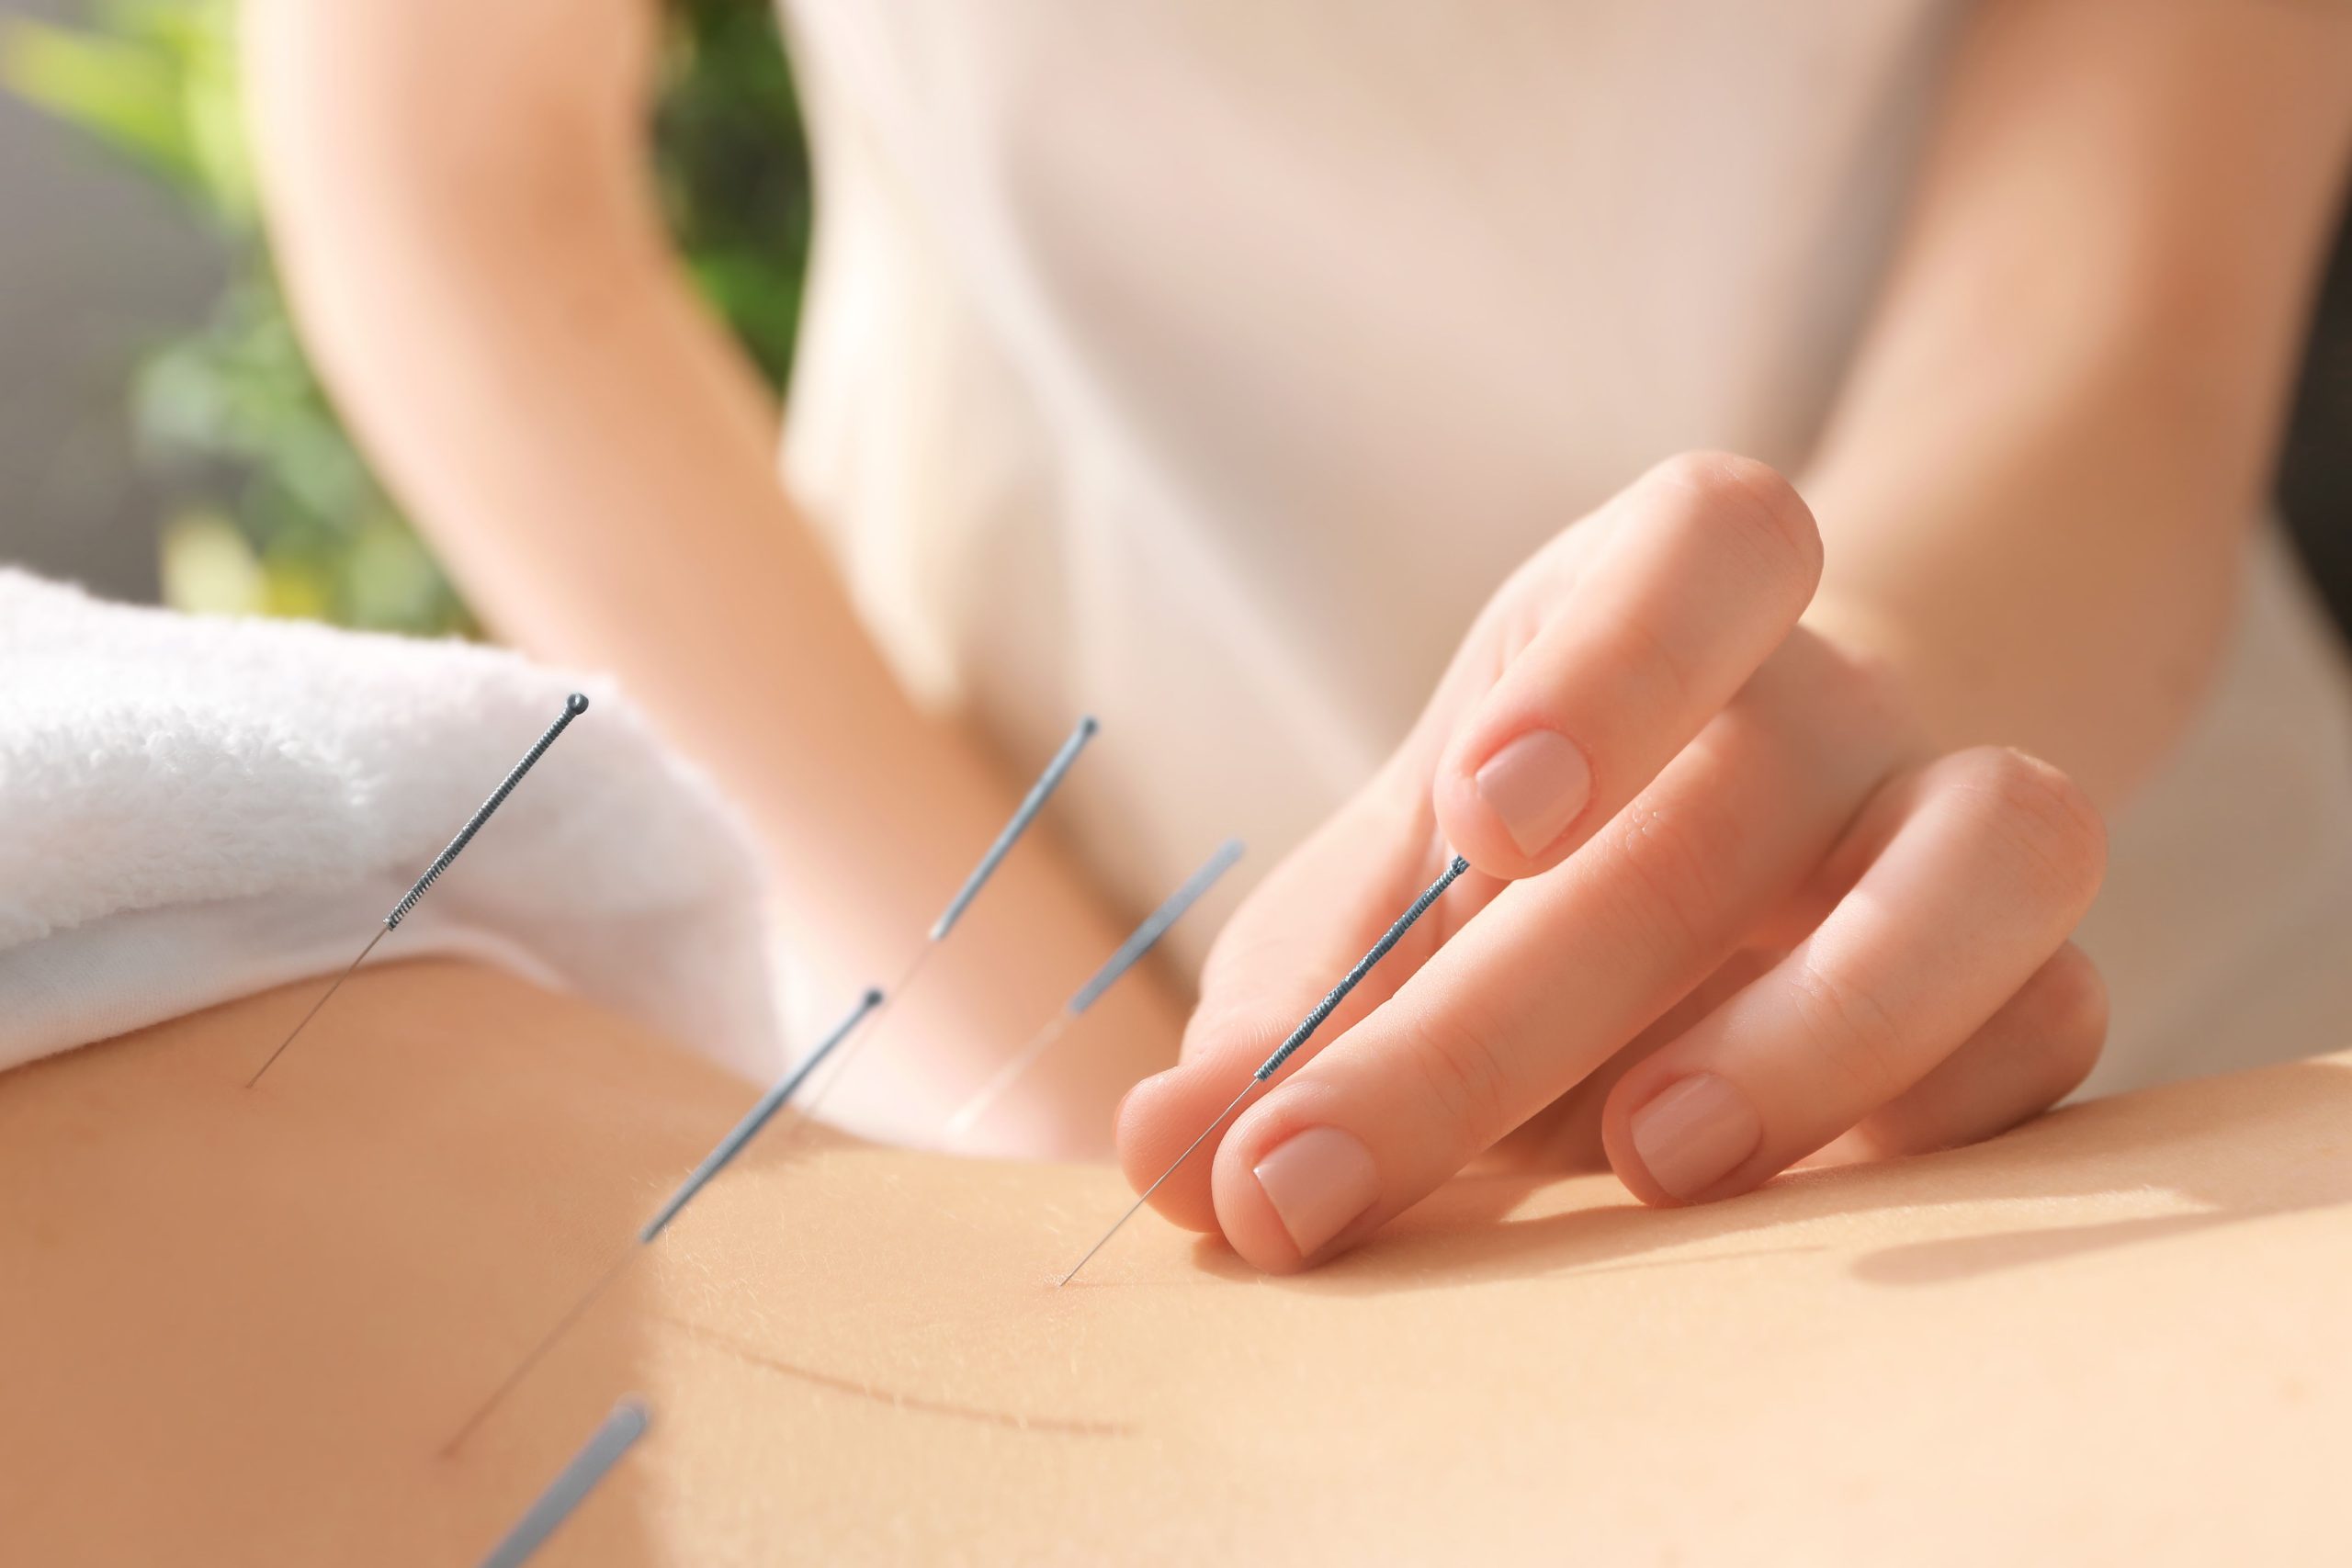 Acupuncture For Back Pain Benefits, Possible Risks, And Techniques